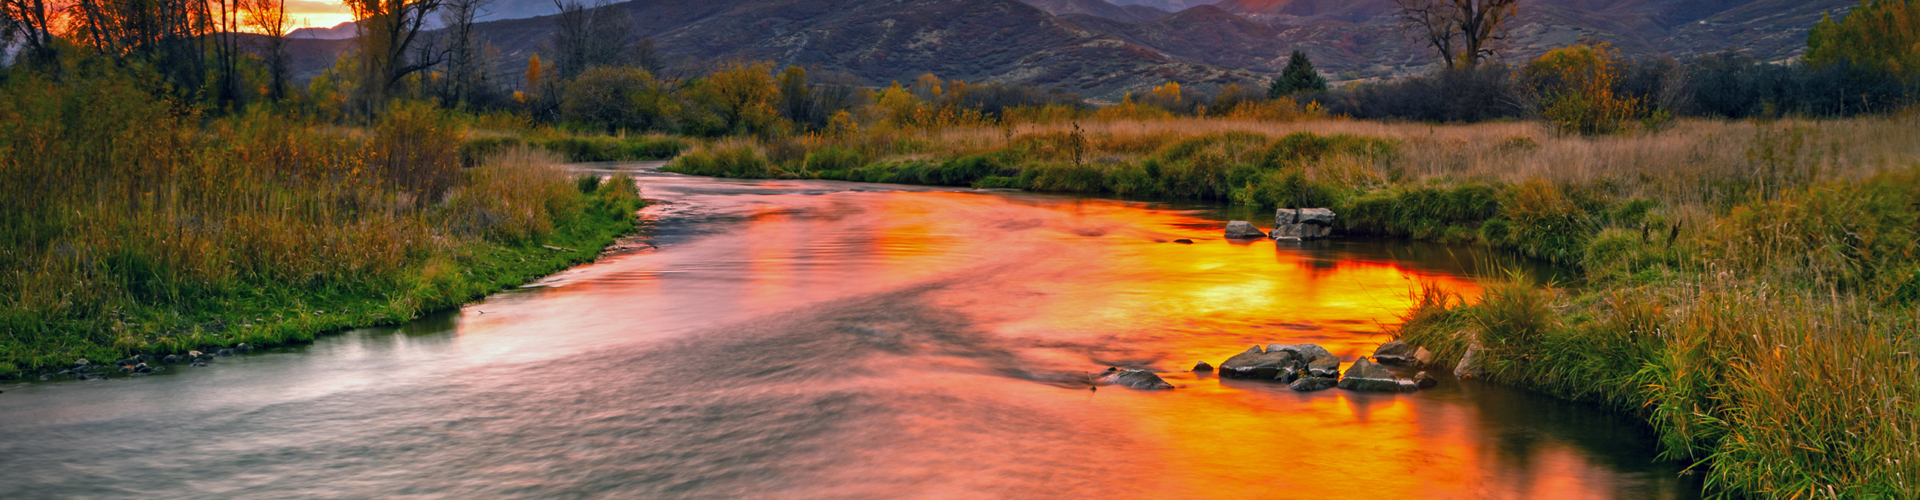 shutterstock_1598079388Golden Sunset at the Provo River, Midway,